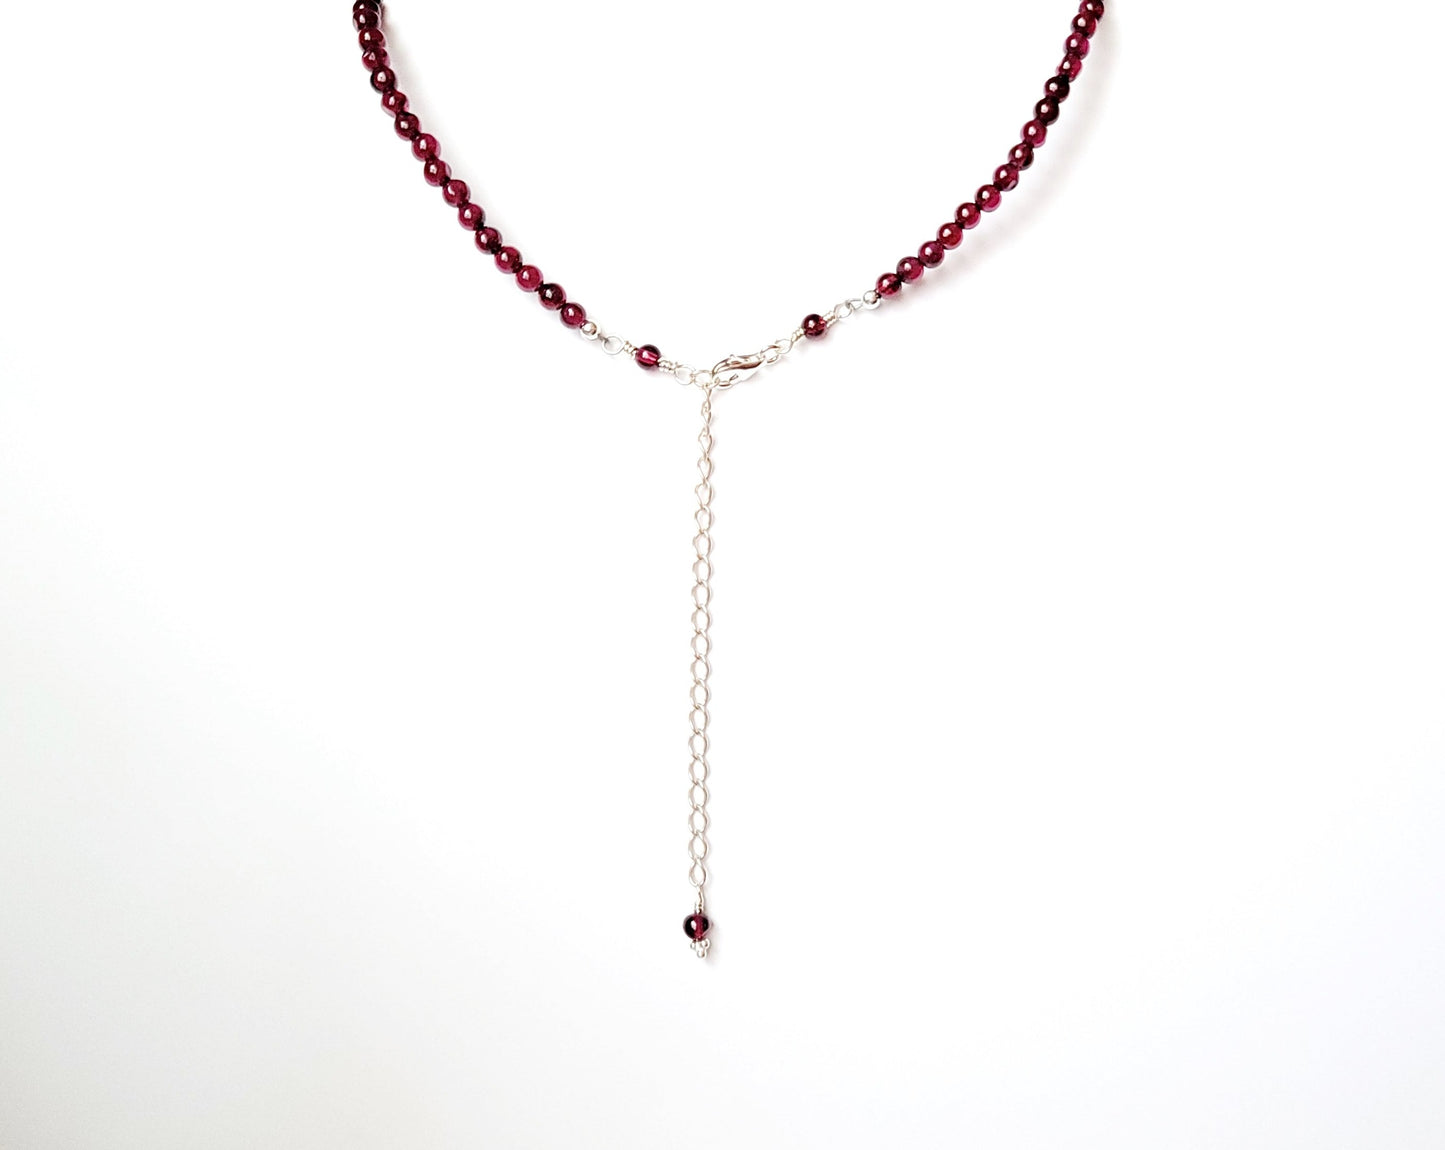  Deep Red Garnet Beaded Necklace, Back Chain